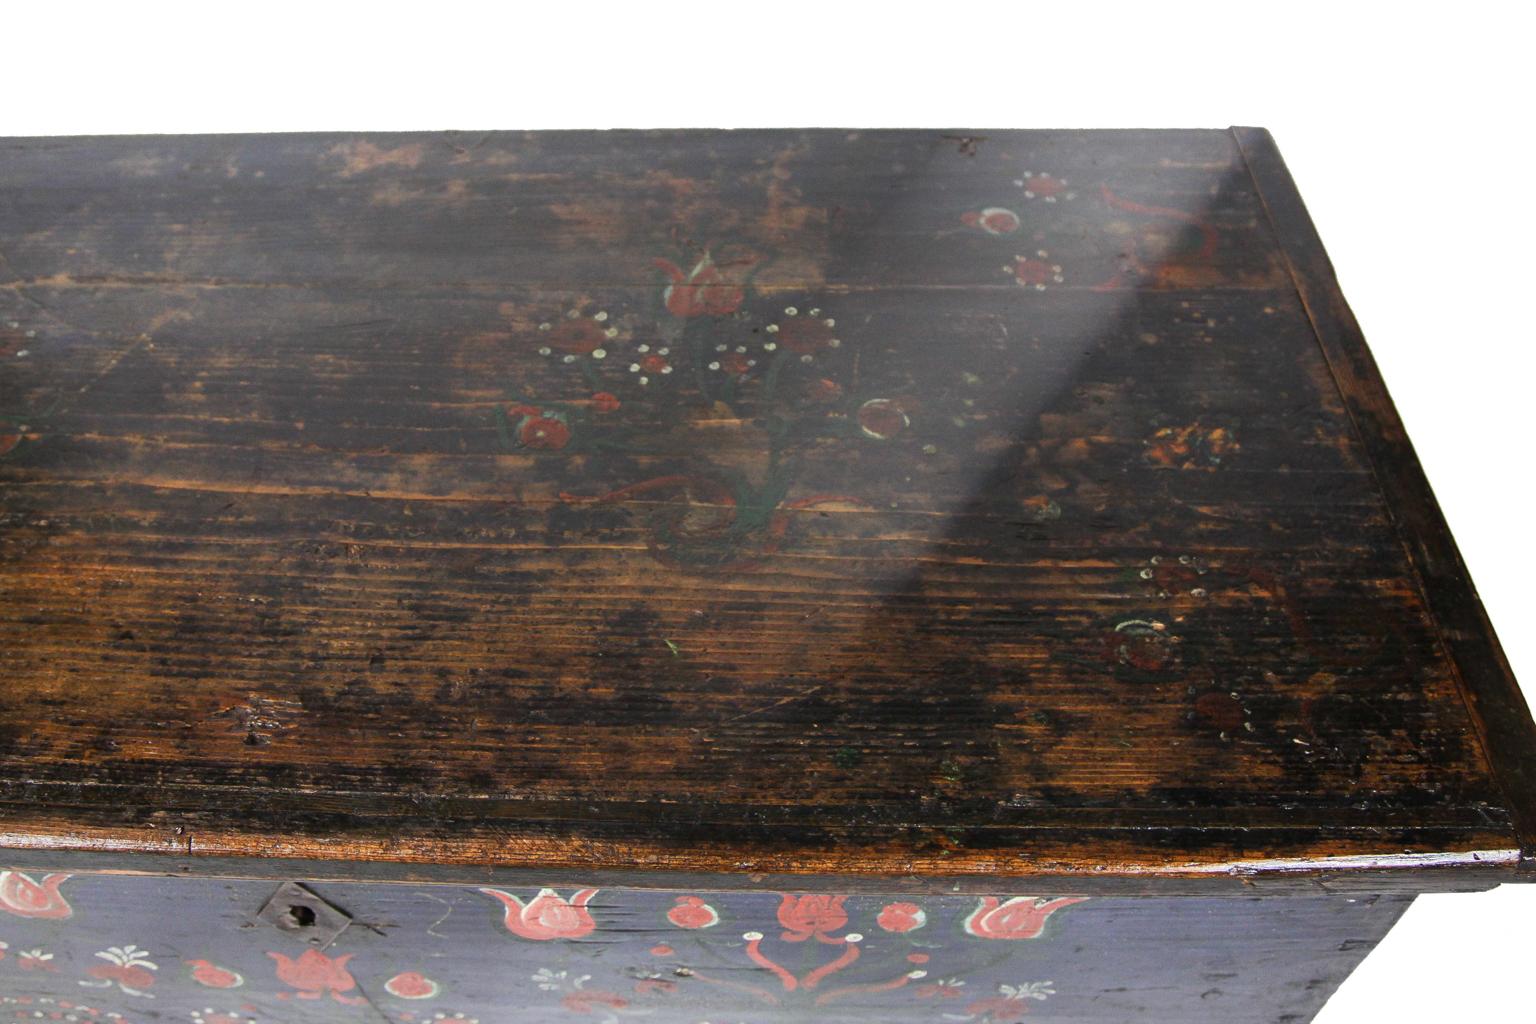 19th century one-drawer painted blanket chest, the dovetailed chest with stylized floral decoration on blue ground, original ring pulls, interior candle box, bun feet, dated 1892.